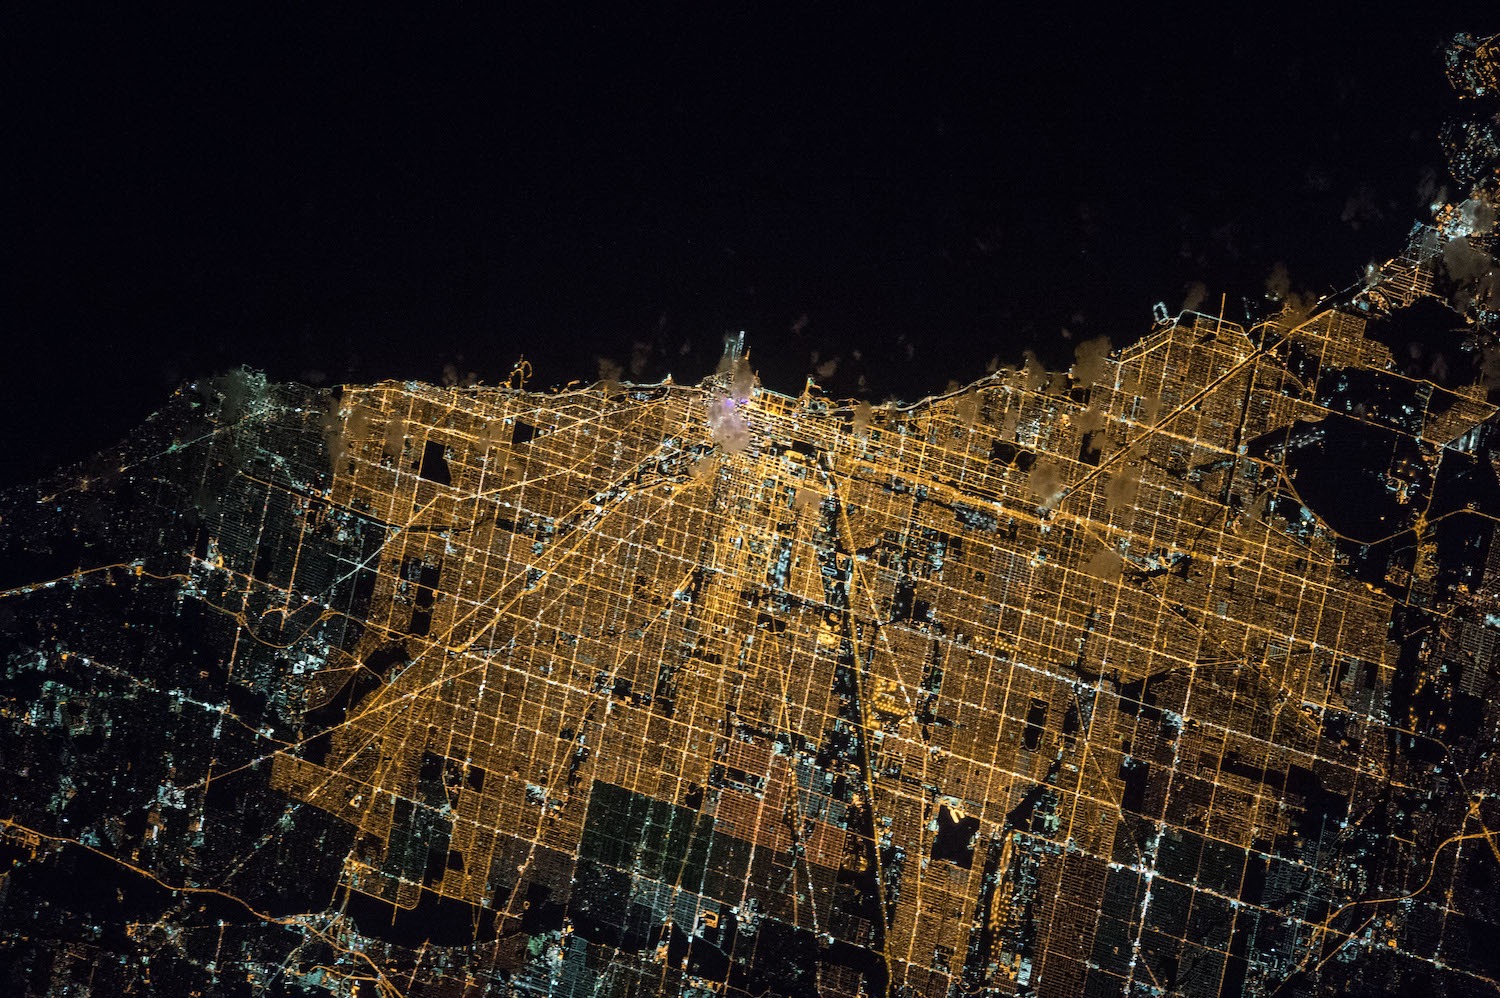 Chicago as seen from space